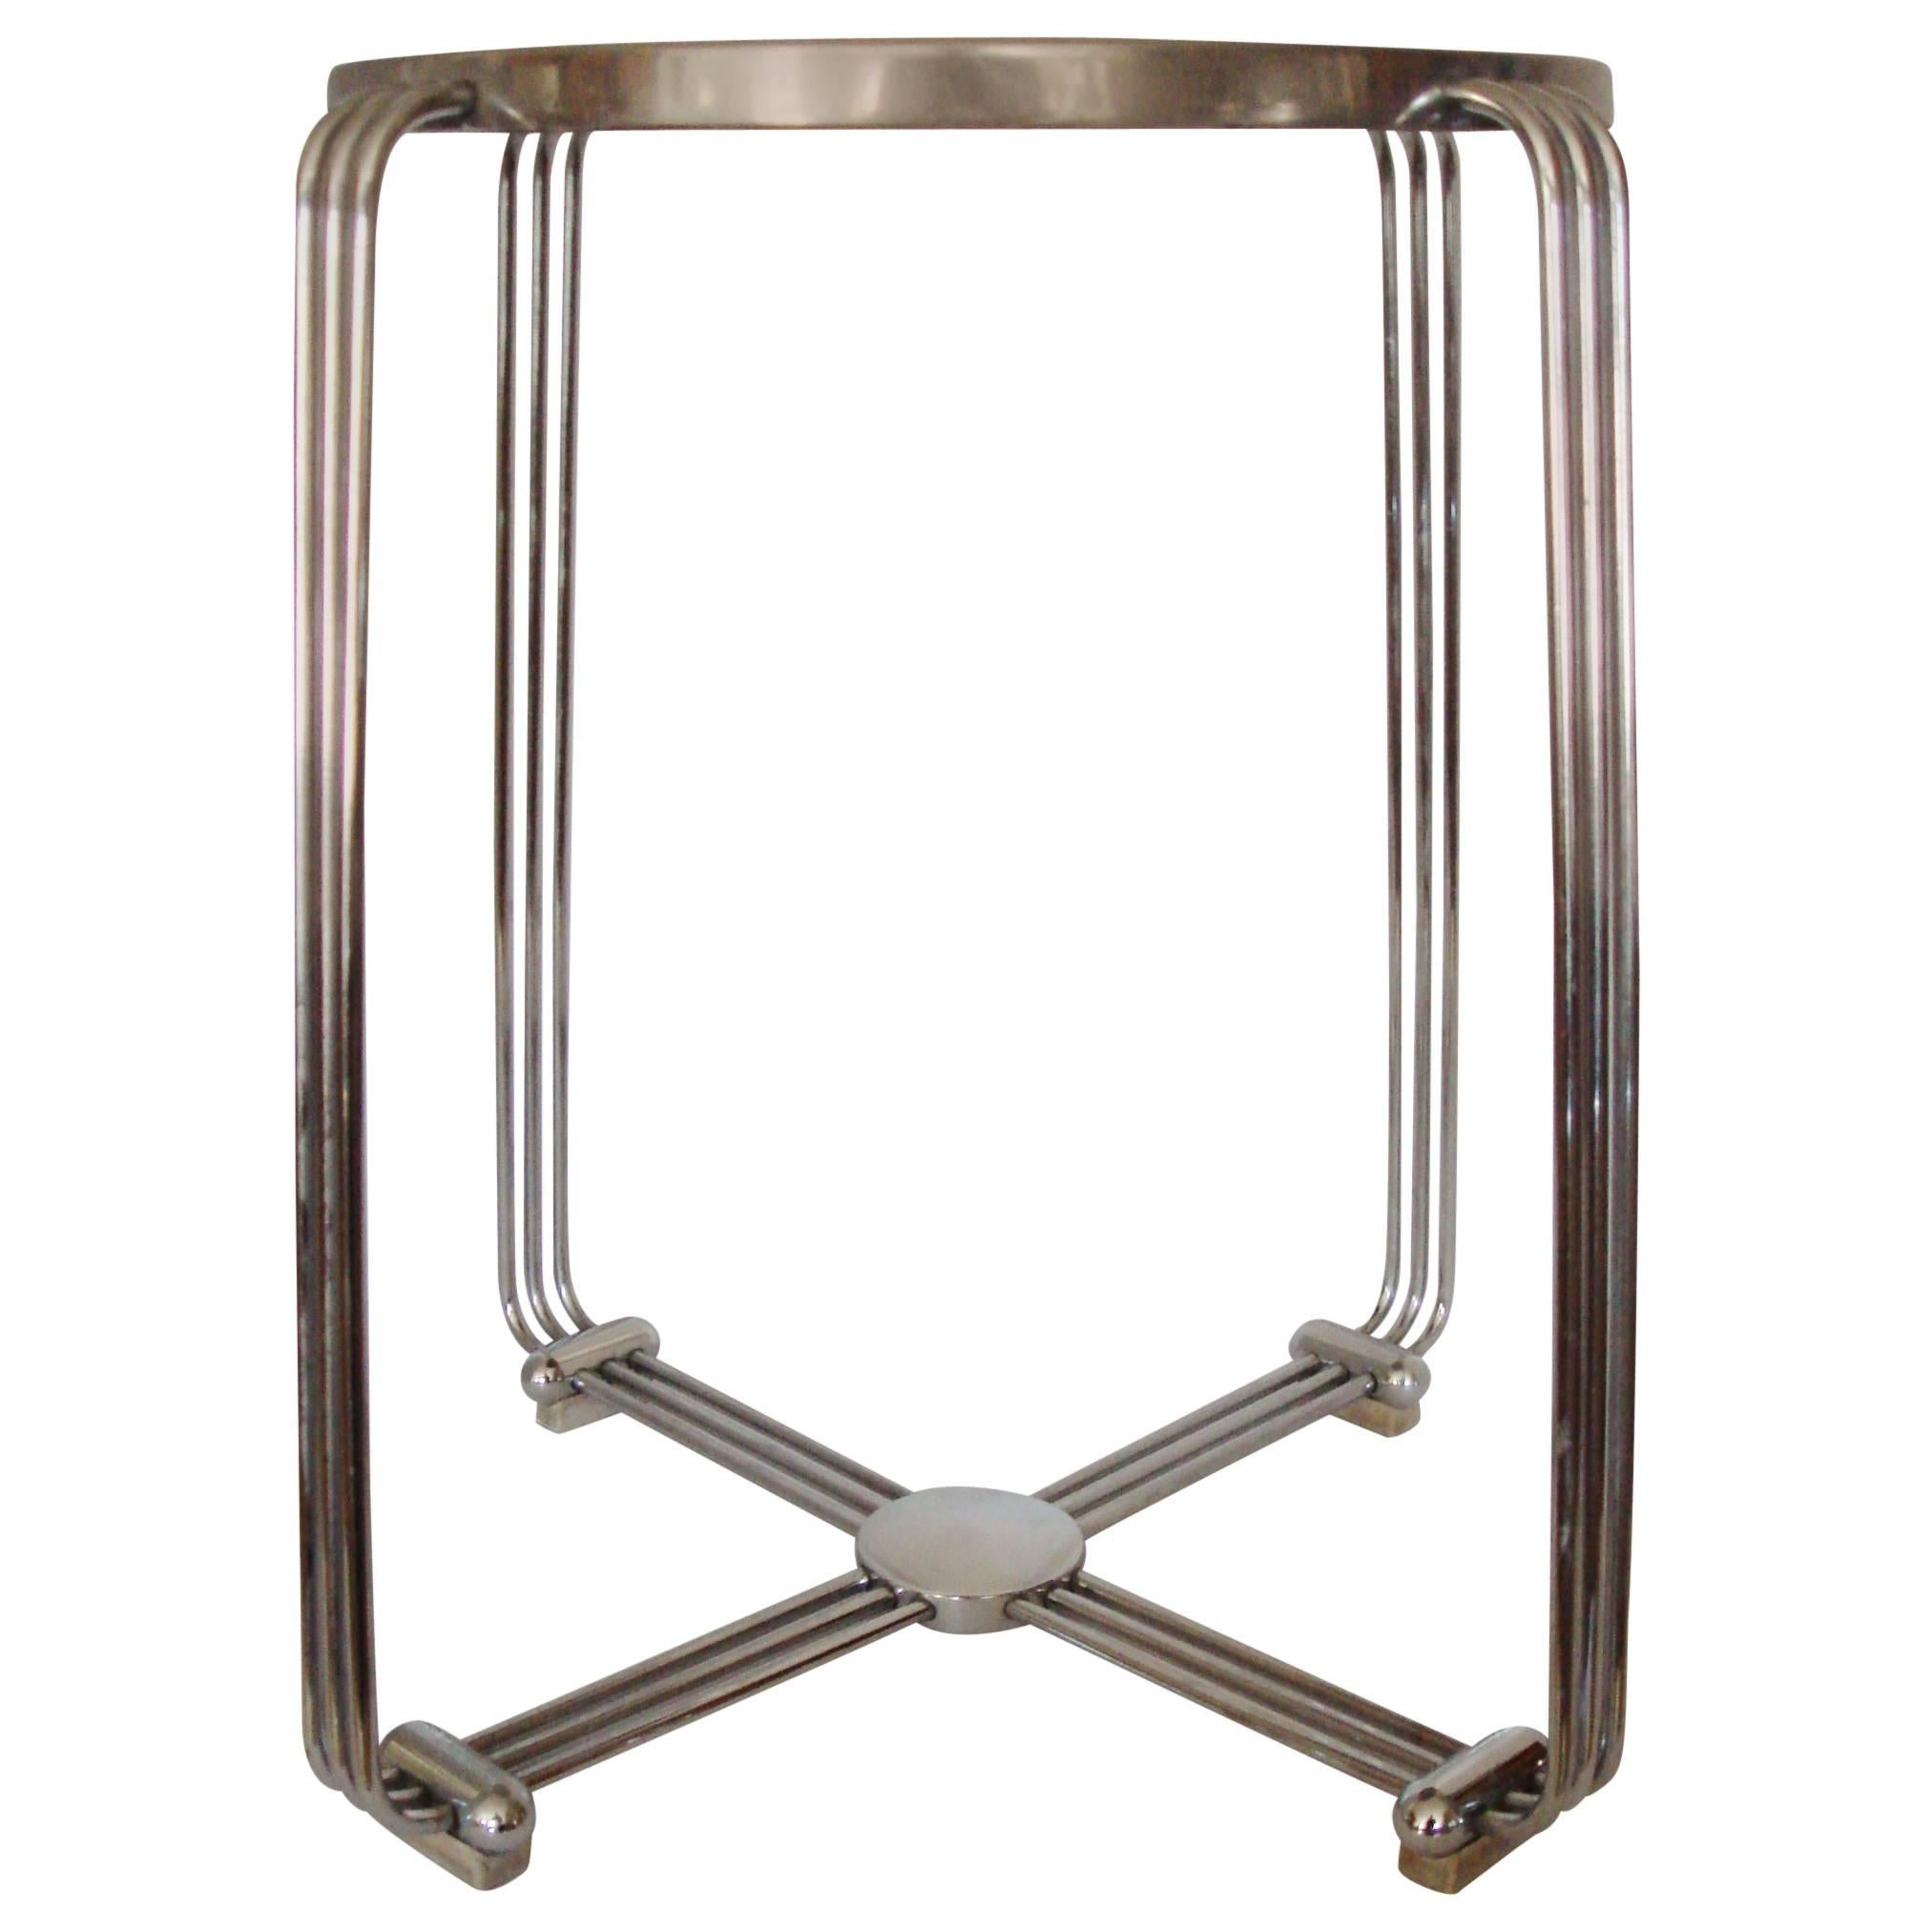 English Art Deco Chrome, Aluminum and Hard Rubber Side Table or Stool by Alpax